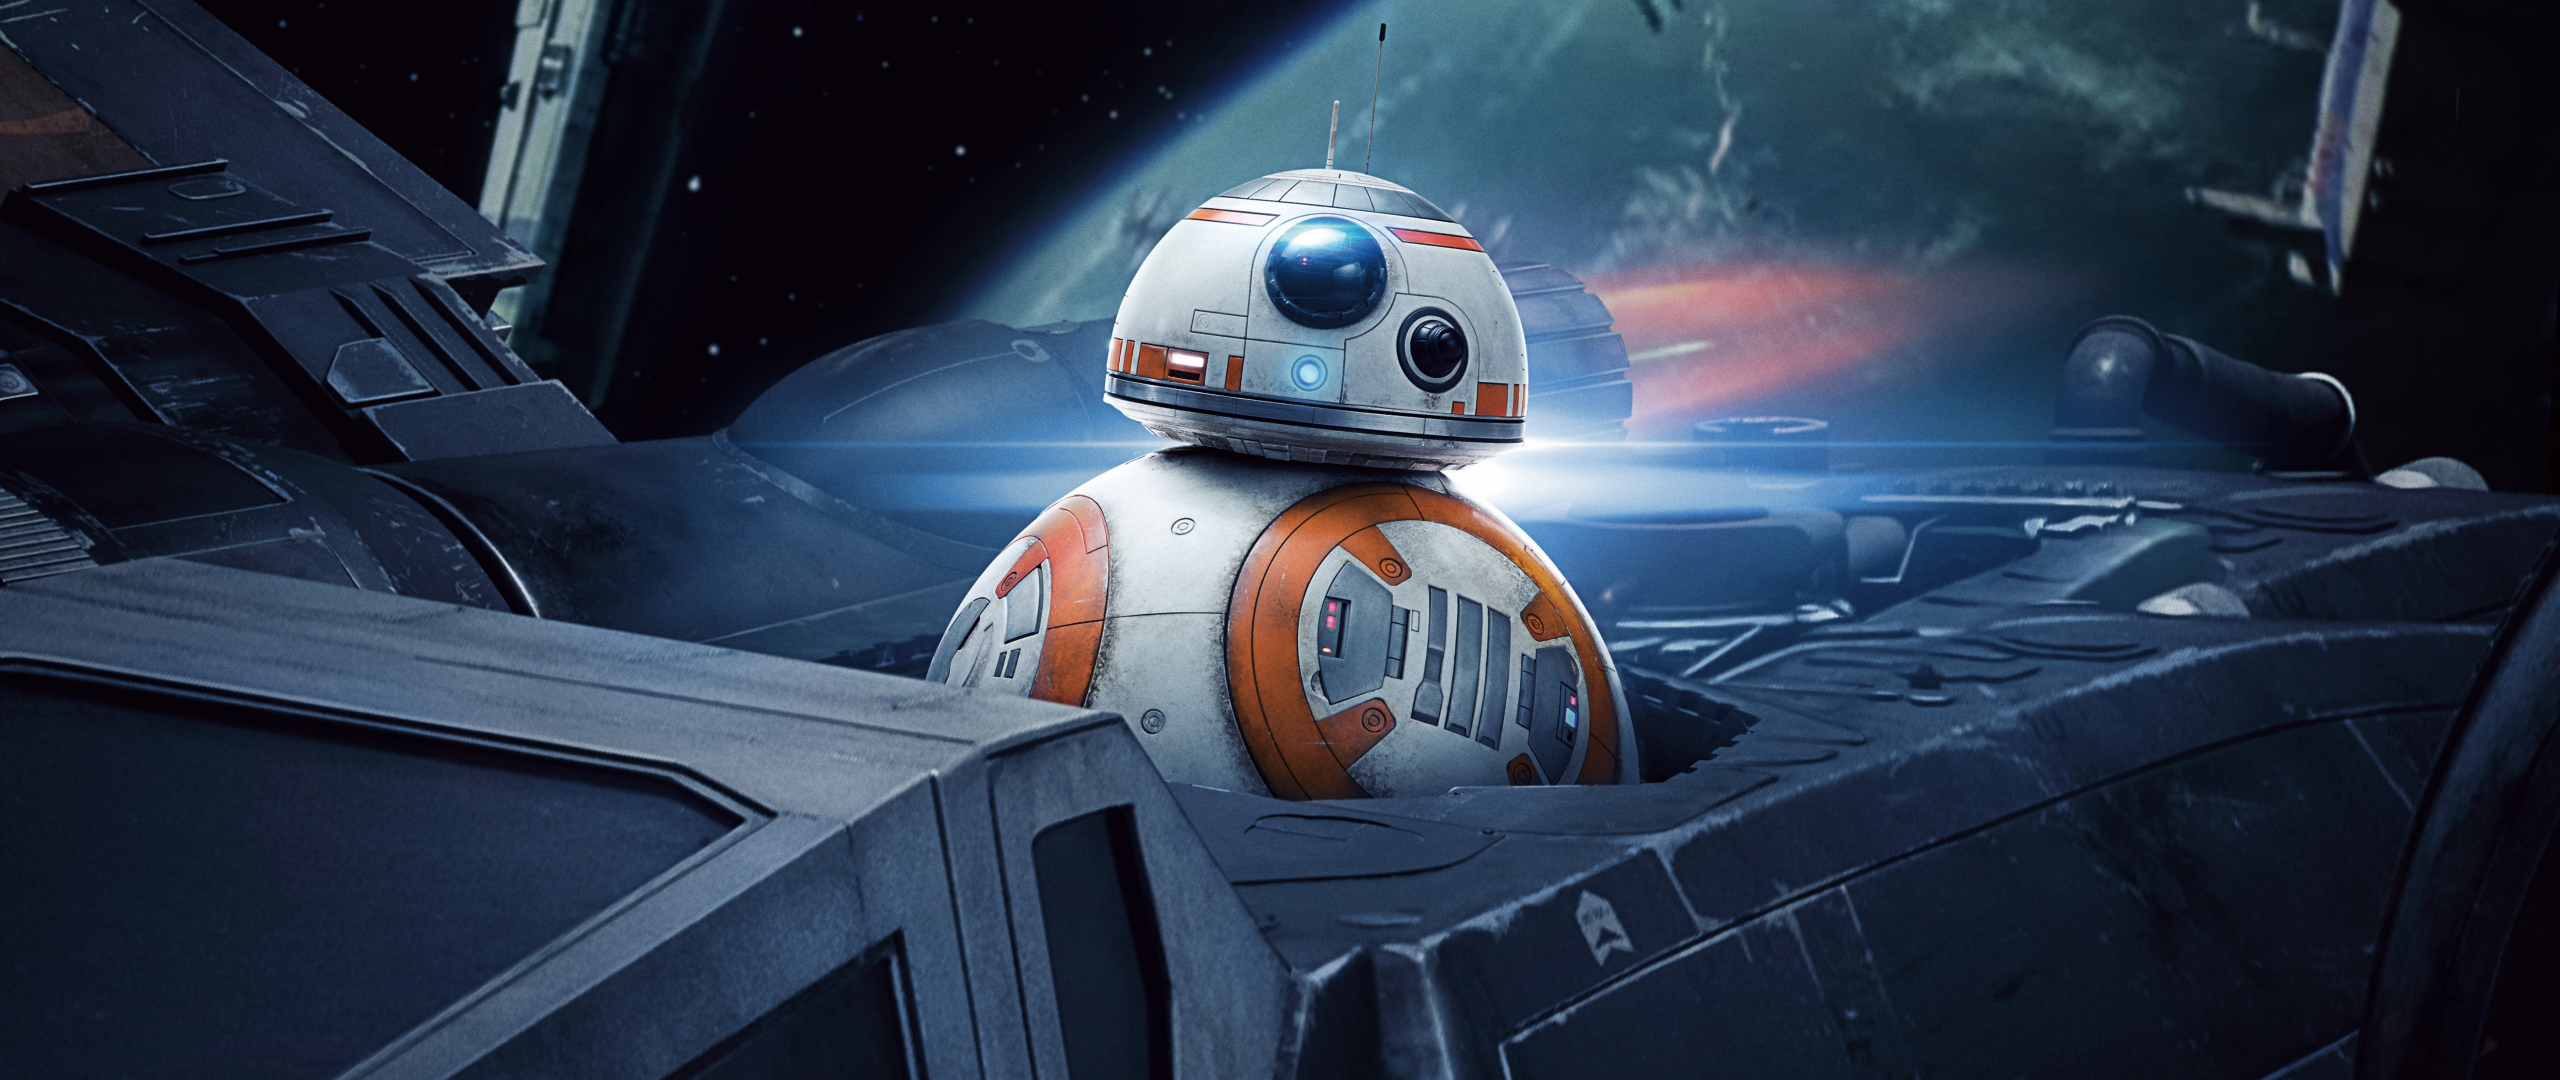 Download 2560x1080 Wallpaper R2 D2 Robot Star Wars The Last Jedi Movie 17 Dual Wide Widescreen 2560x1080 Hd Image Background 1509